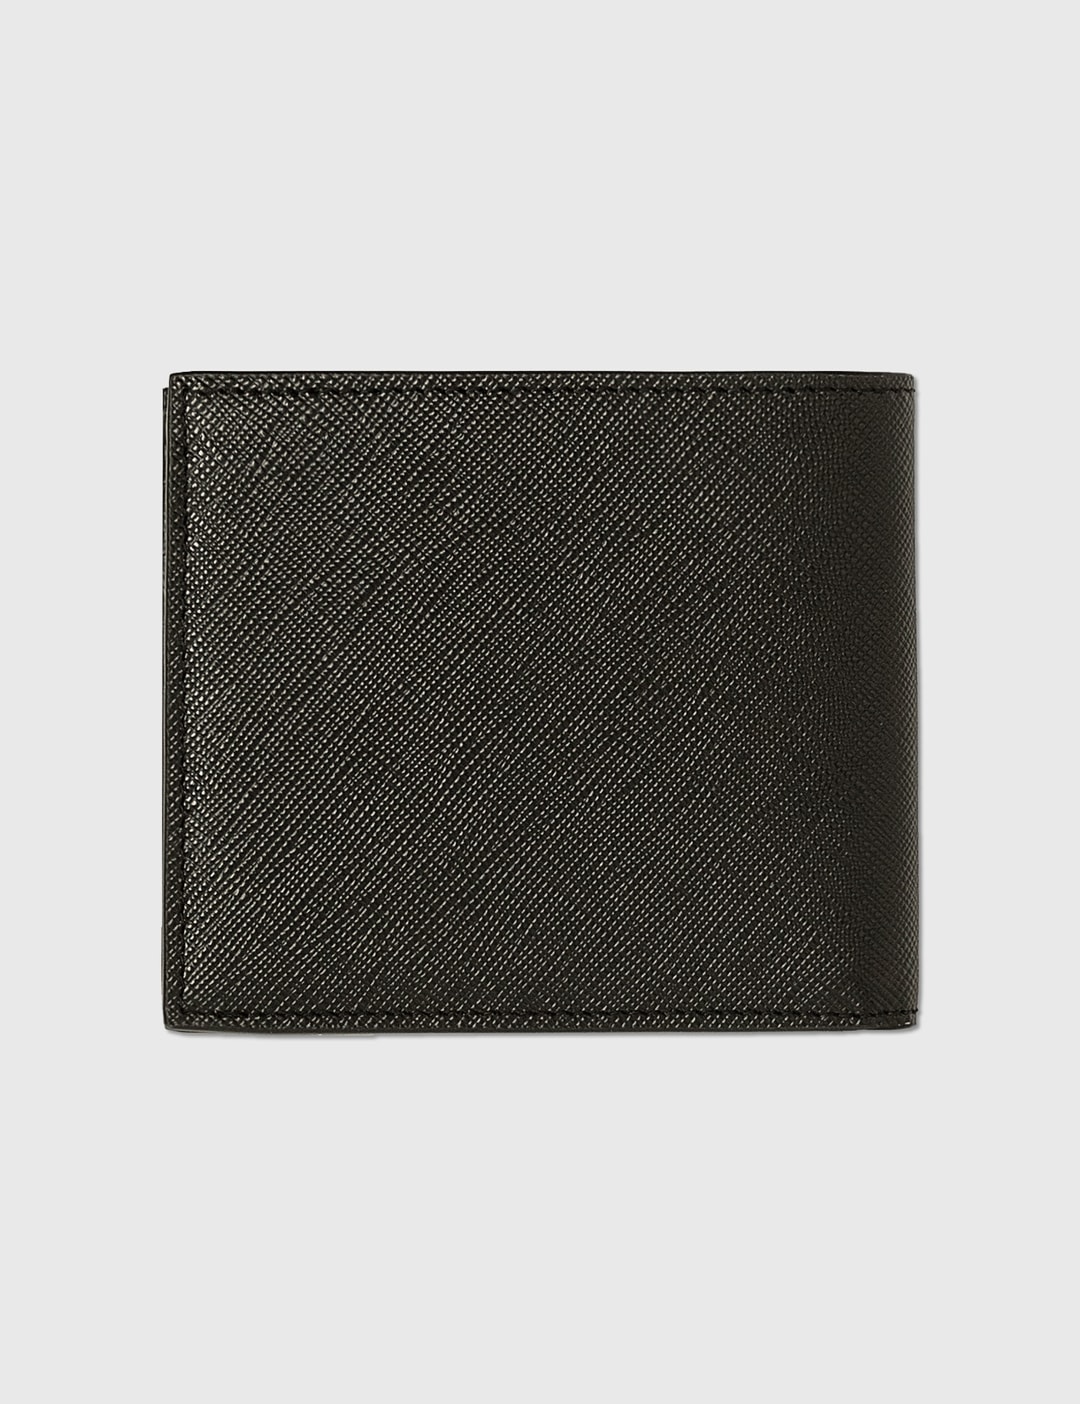 Prada - Logo Wallet | HBX - Globally Curated Fashion and Lifestyle by ...